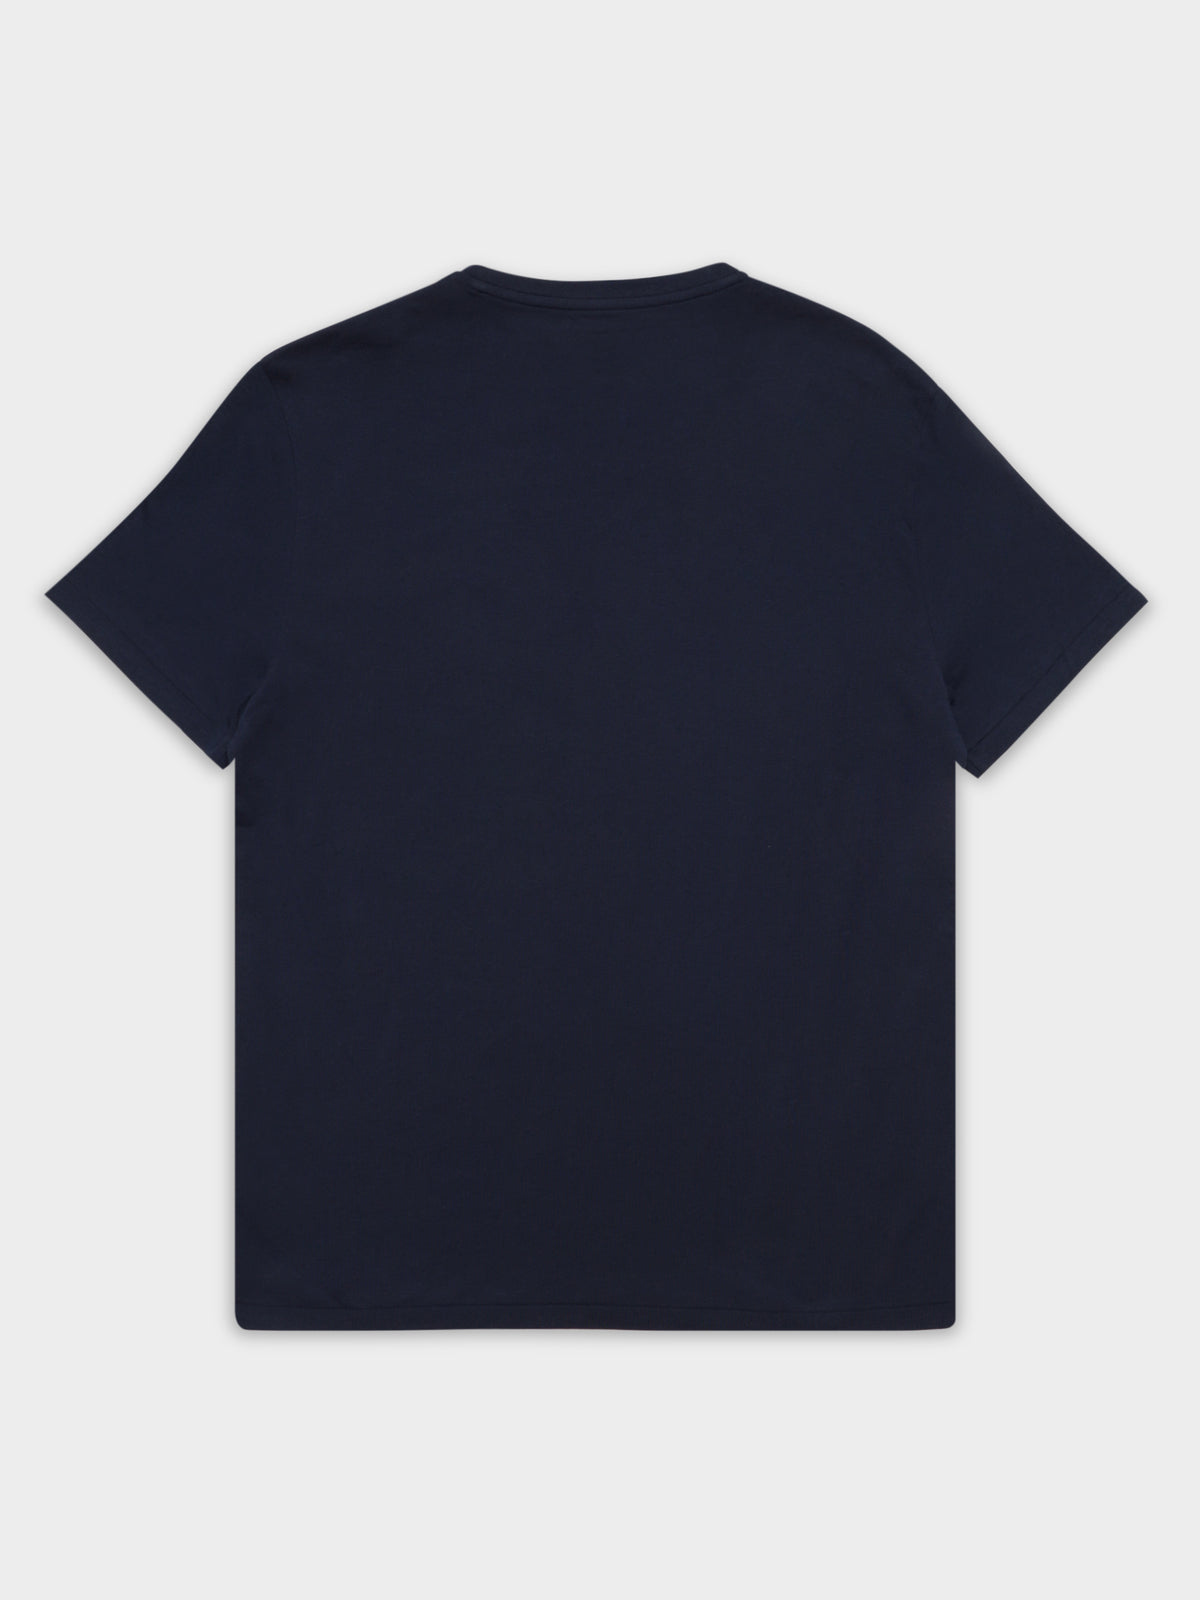 Polo 1967 Print T-Shirt in Navy Blue